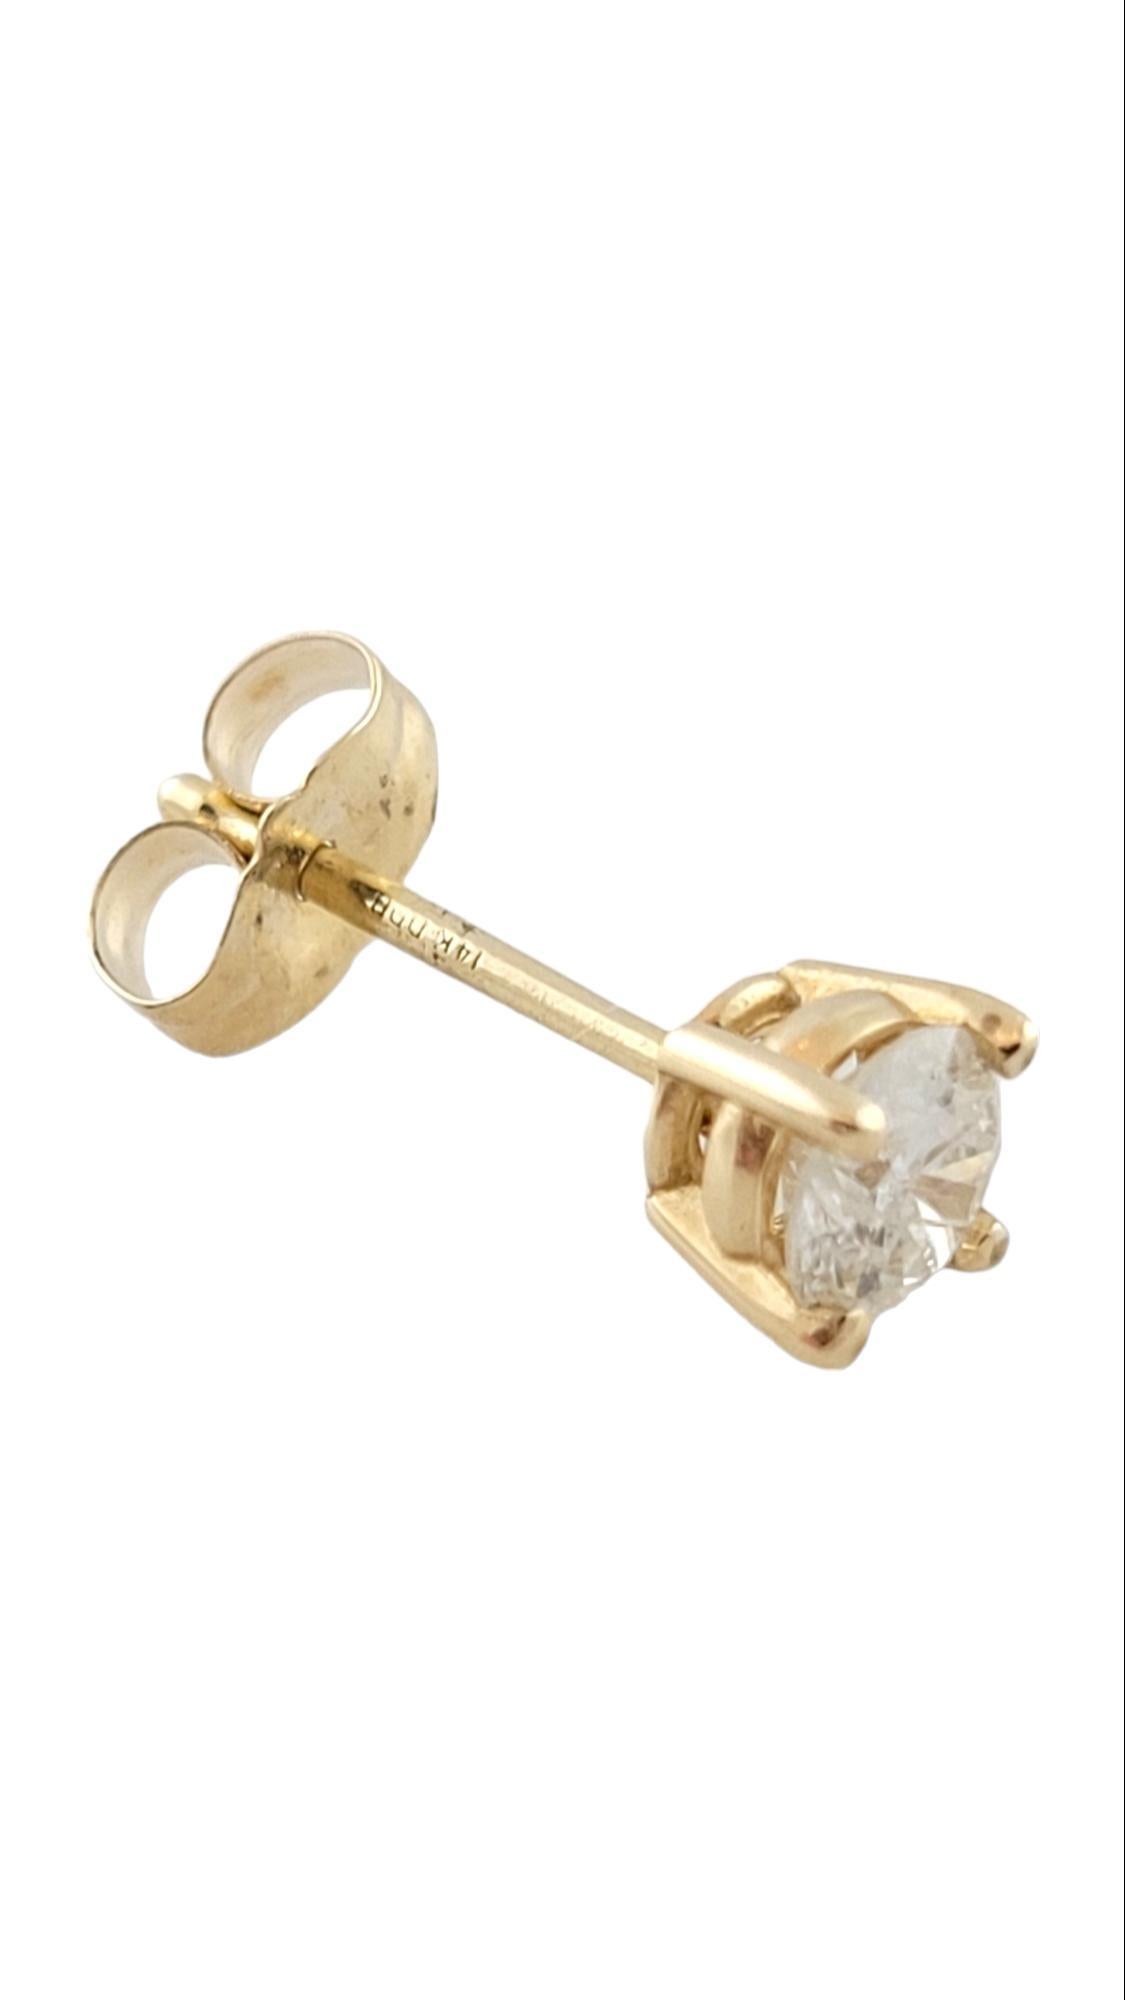 14K Yellow Gold Diamond Stud

This gorgeous stud features a sparkling round brilliant diamonds set in 14K yellow gold earring!

Approximate total diamond weight: .19 cts

Diamond color: I

Diamond clarity: I2

Size: 4.1mm X 4.1mm

Weight: 0.29 g/